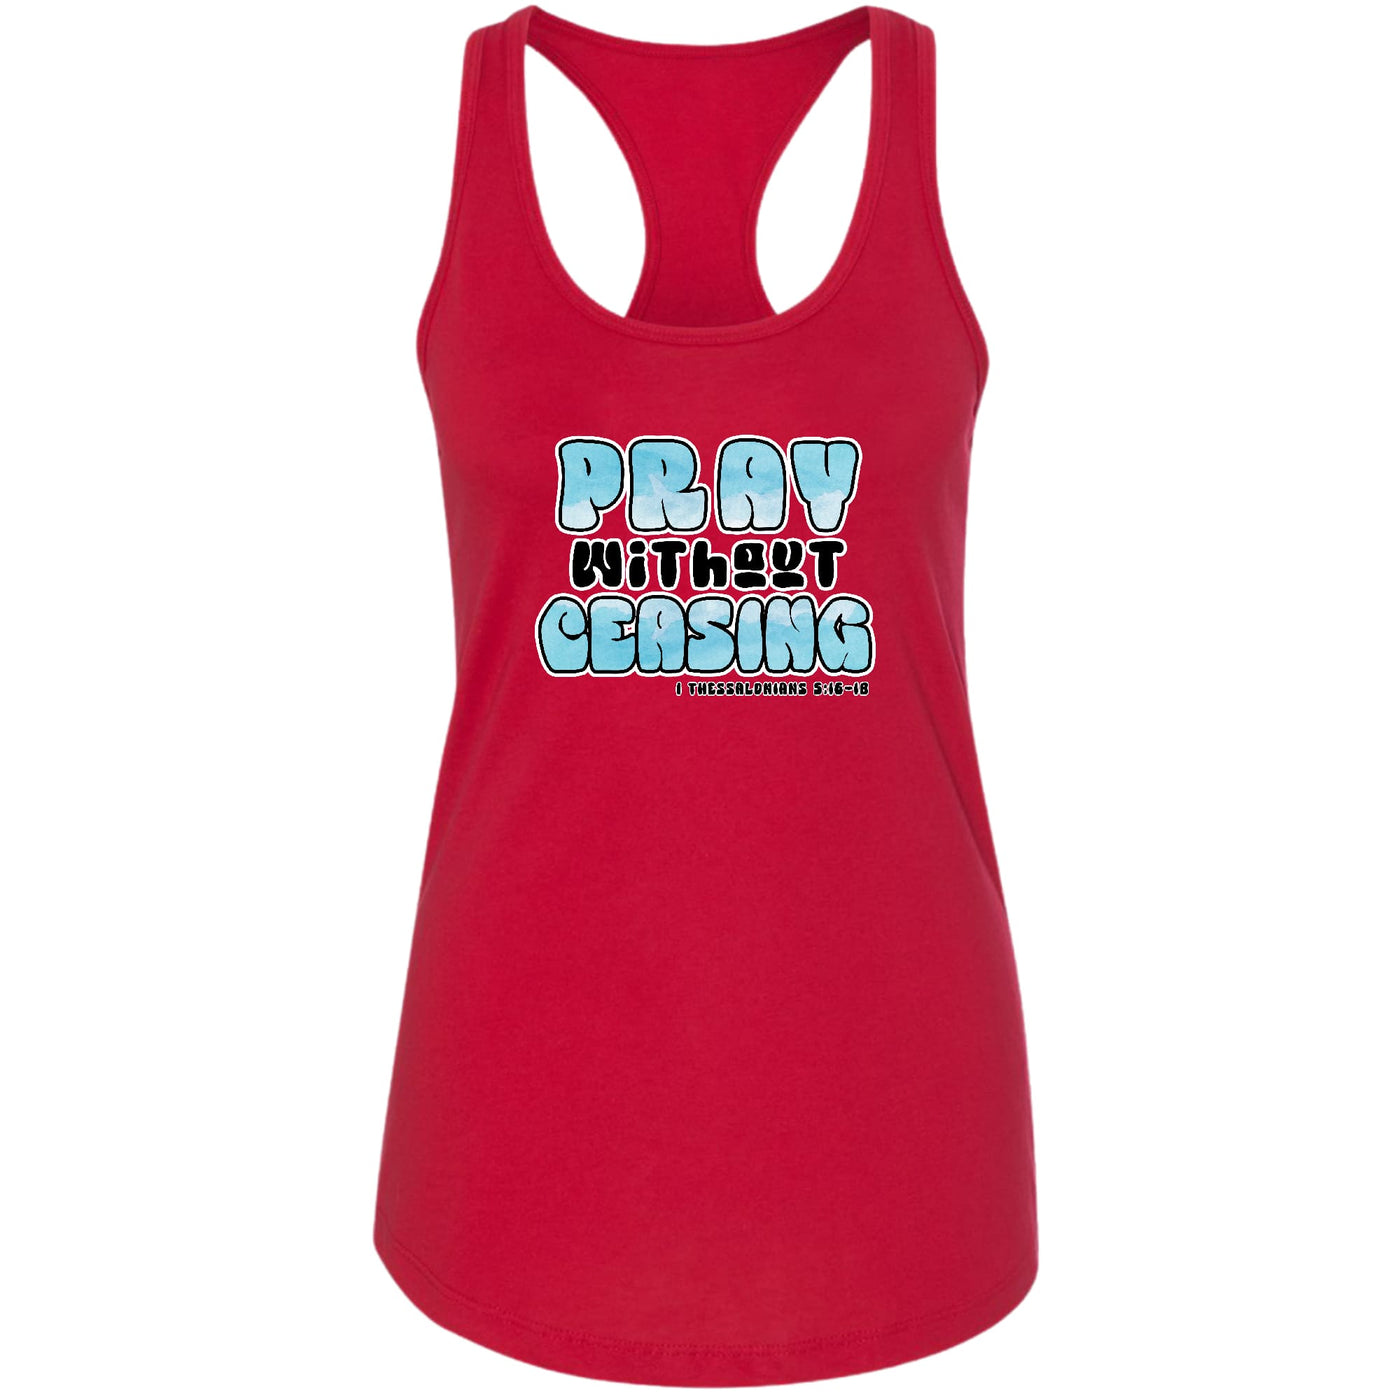 Womens Tank Top Fitness T - shirt Pray Without Ceasing Inspirational - Tops